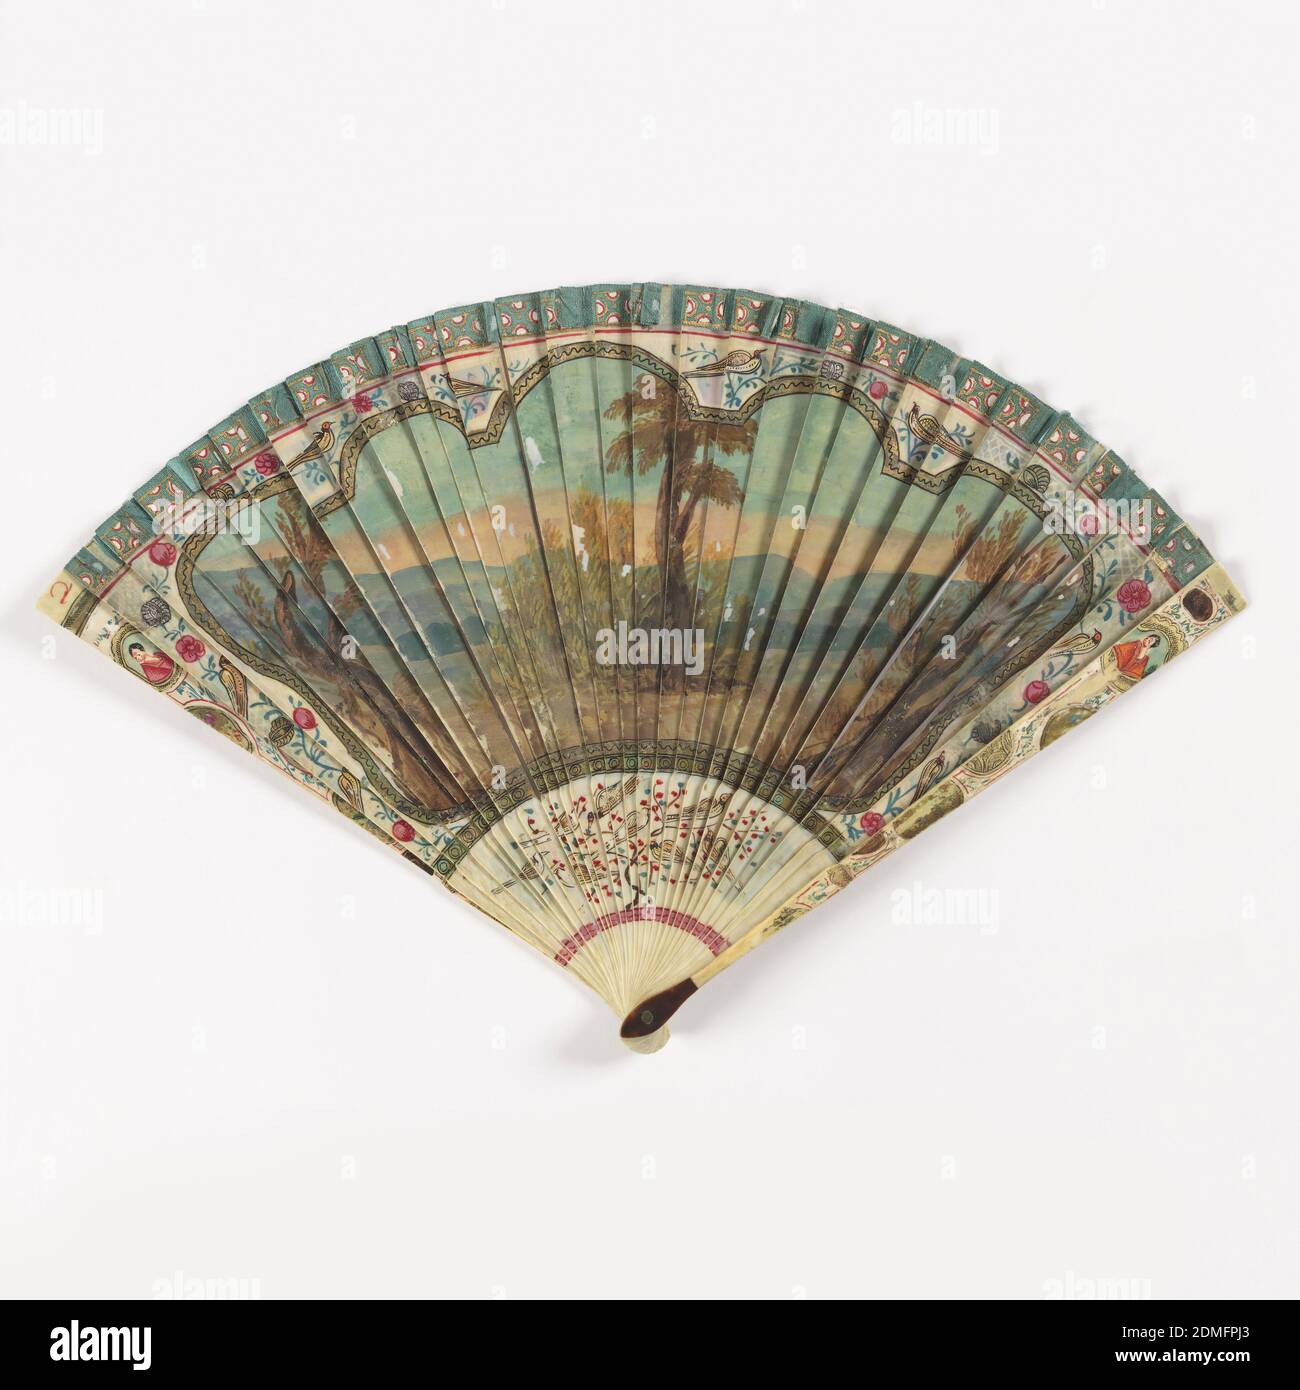 Brisé fan, Painted and gilded ivory sticks, Fan with observe painted with a design of dancers and musicians against a landscape background. Reverse has a landscape scene with trees against a hilly backdrop. In margins are birds and figures in a chinoiserie style., possibly Netherlands, possibly France, ca. 1725, costume & accessories, Brisé fan Stock Photo